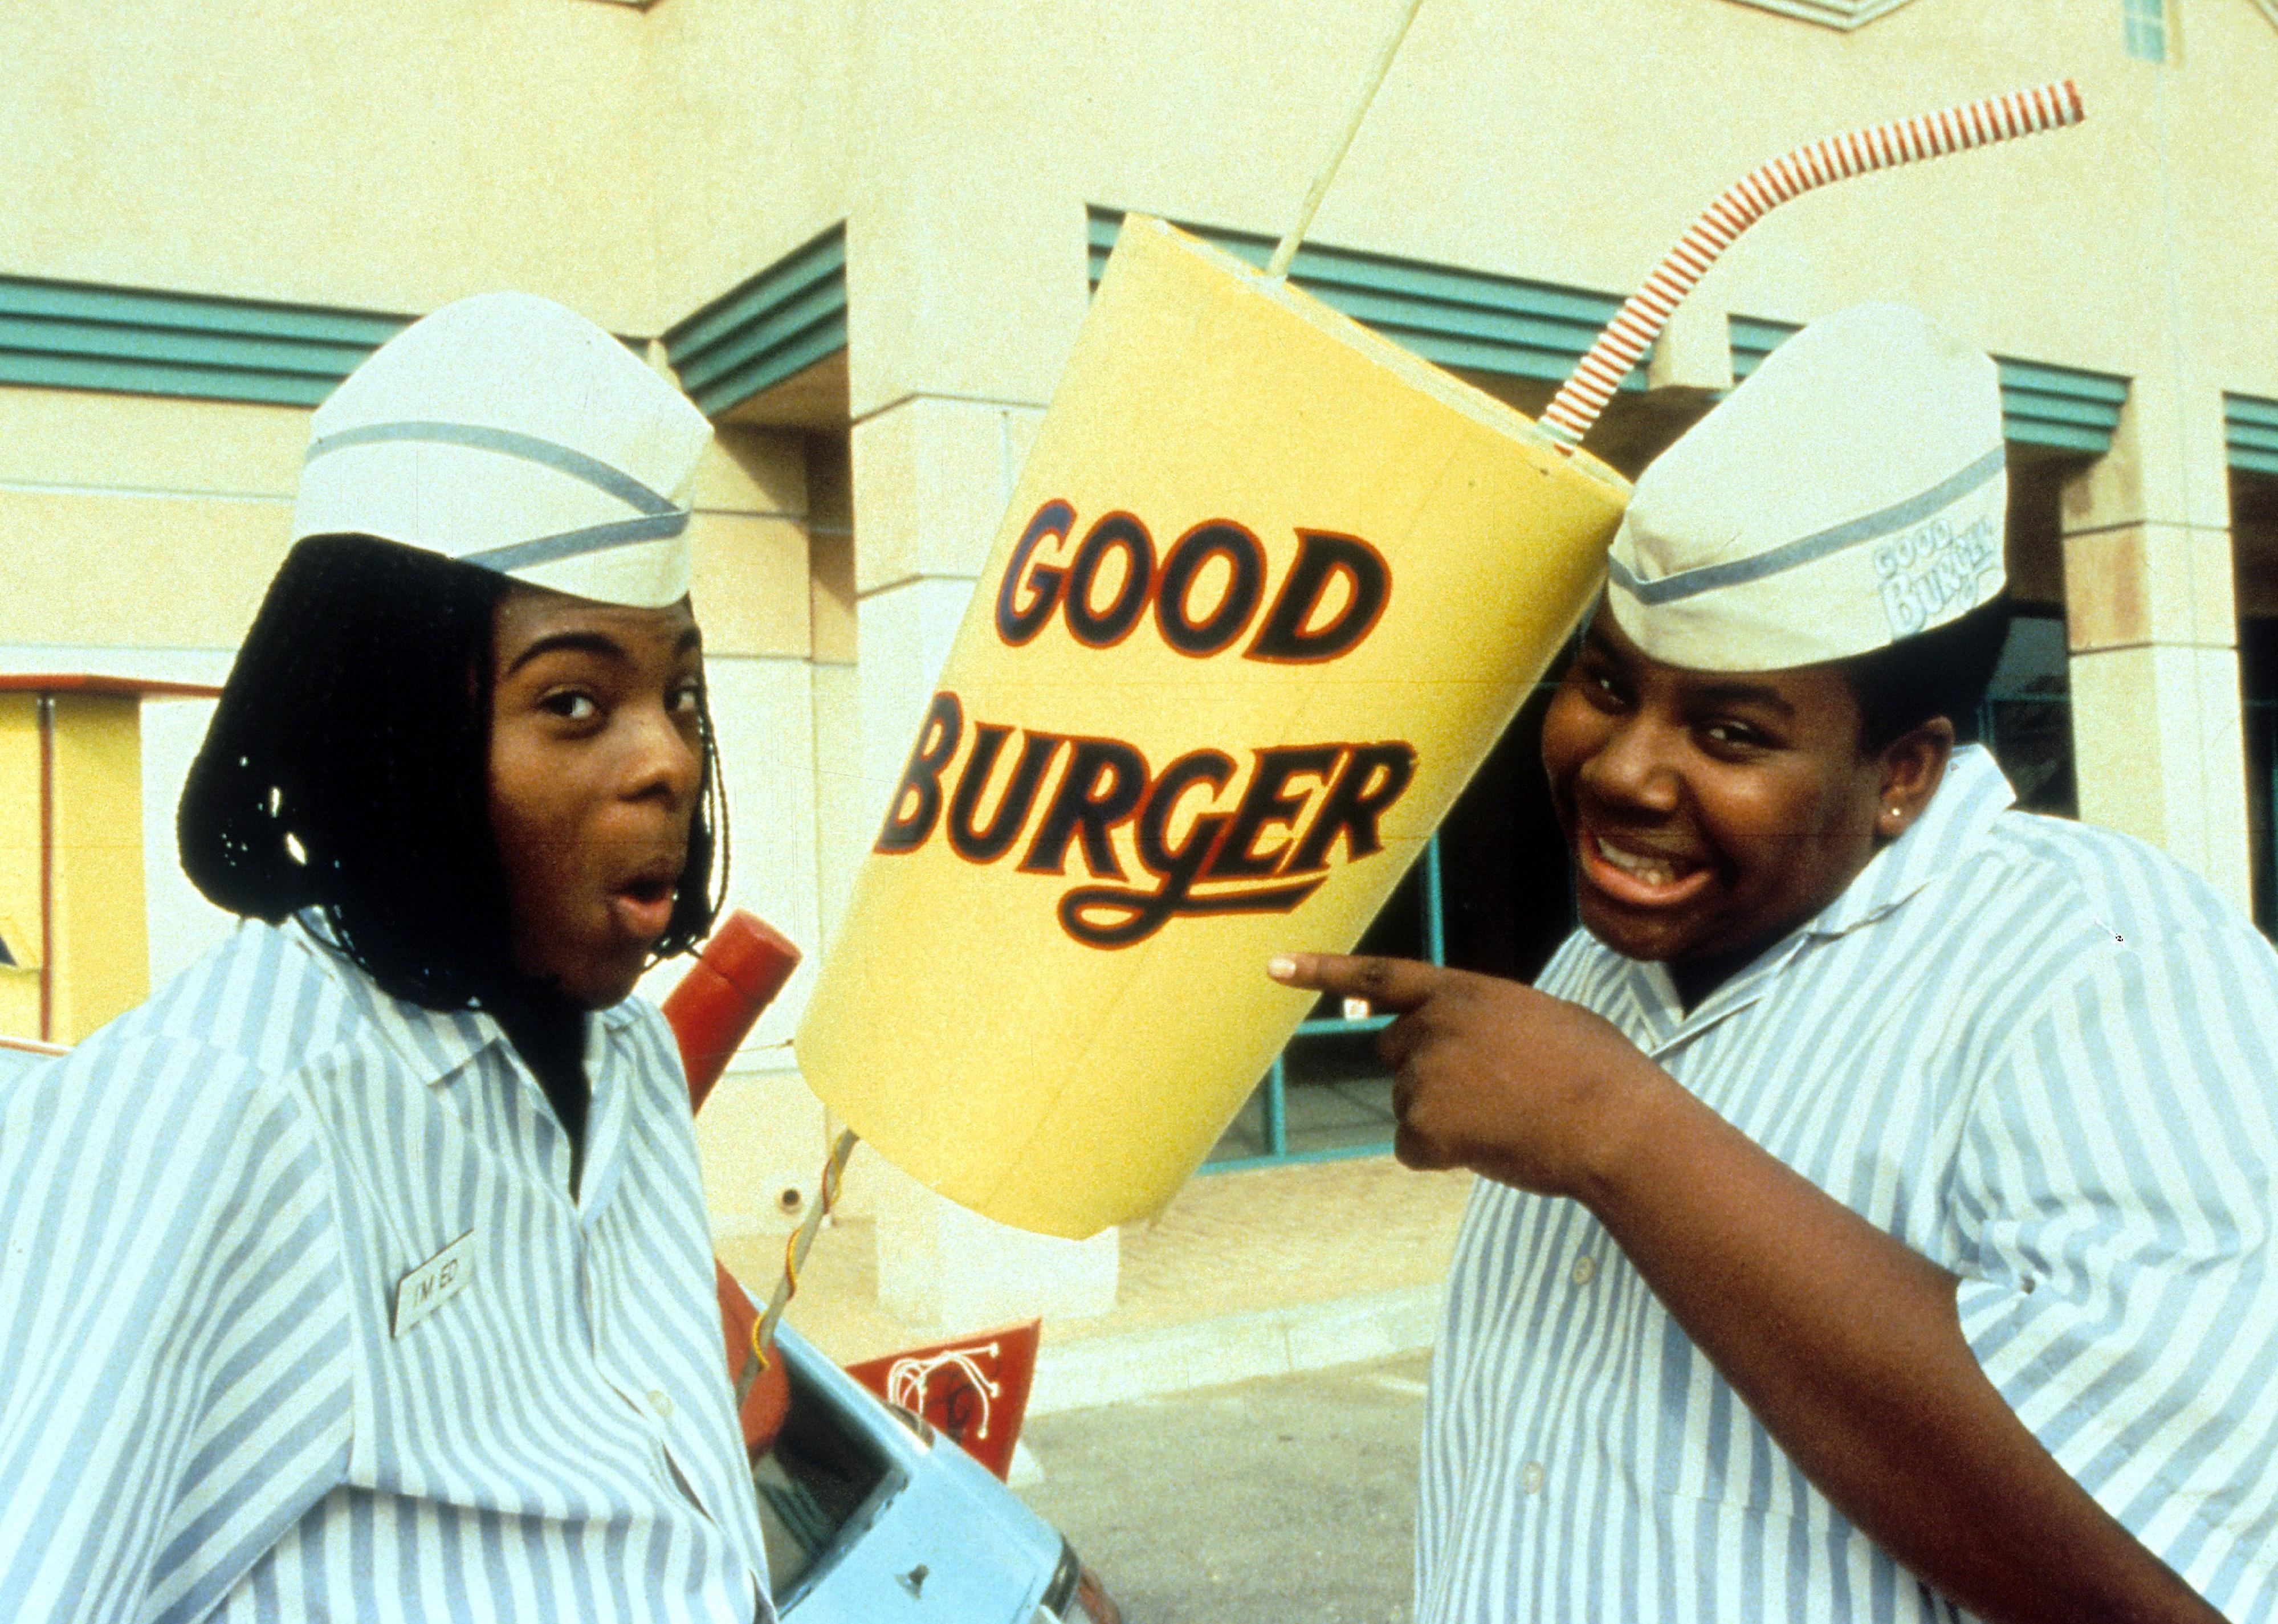 Kenan Thompson and Kel Mitchell posing as their 'Good Burger' characters.